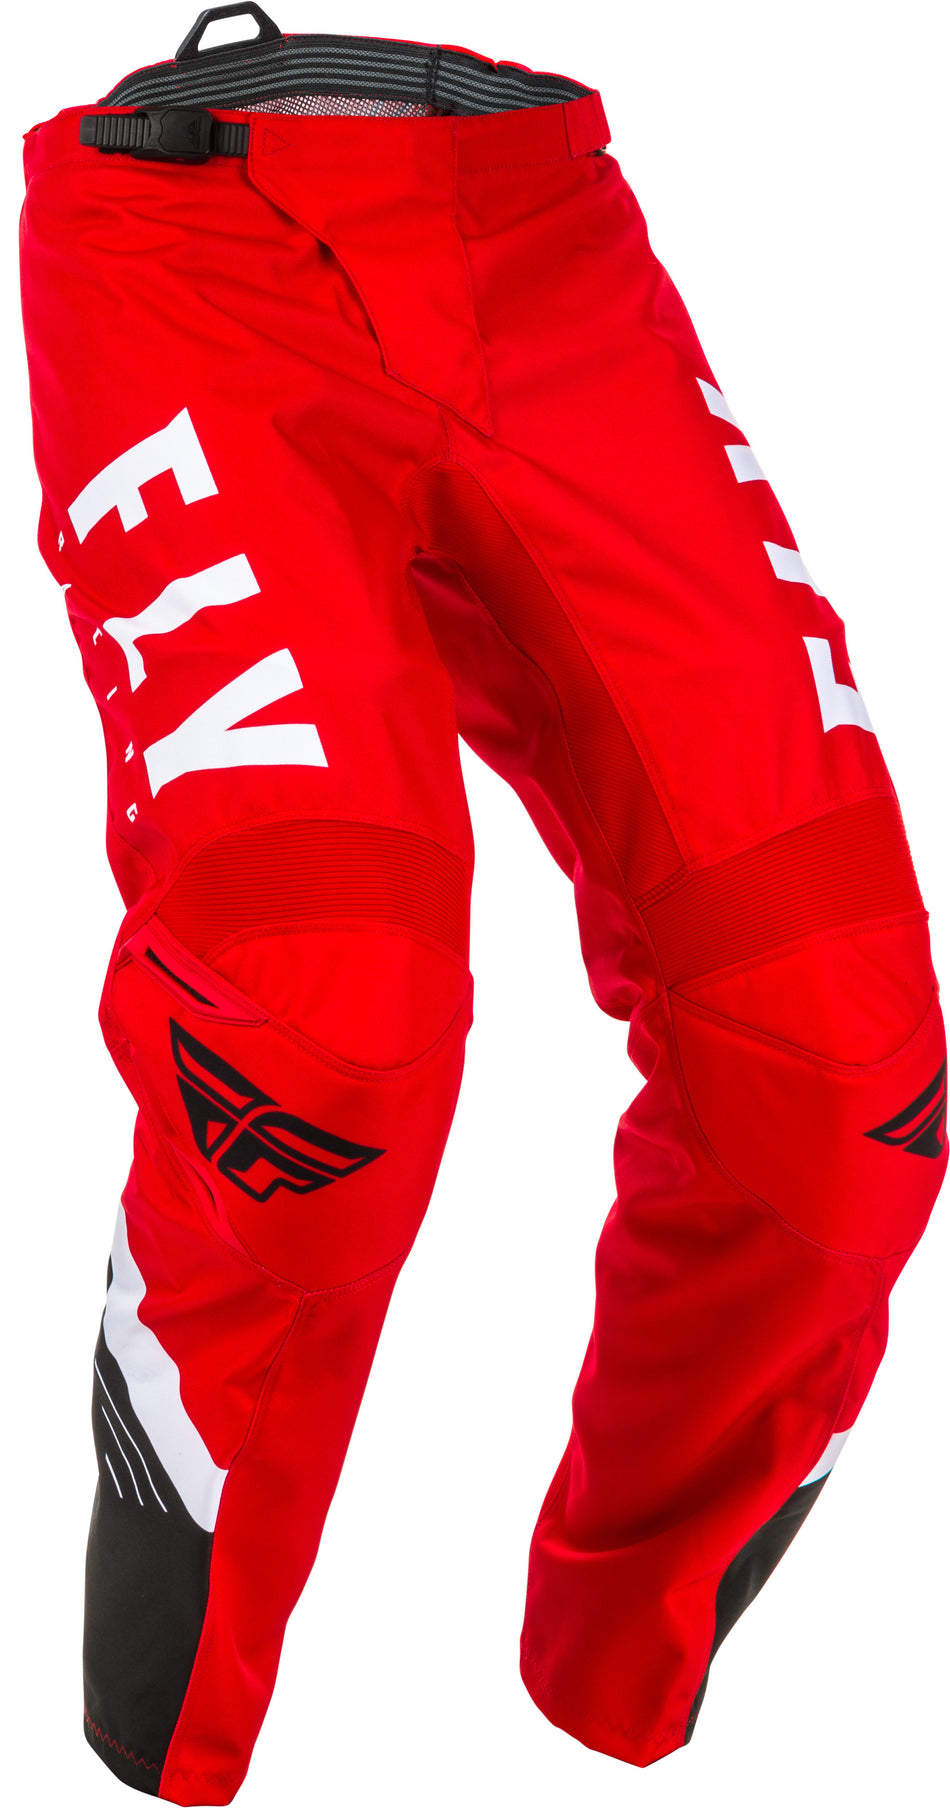 FLY RACING F-16 Pants Red/Black/White Sz 28 373-93328